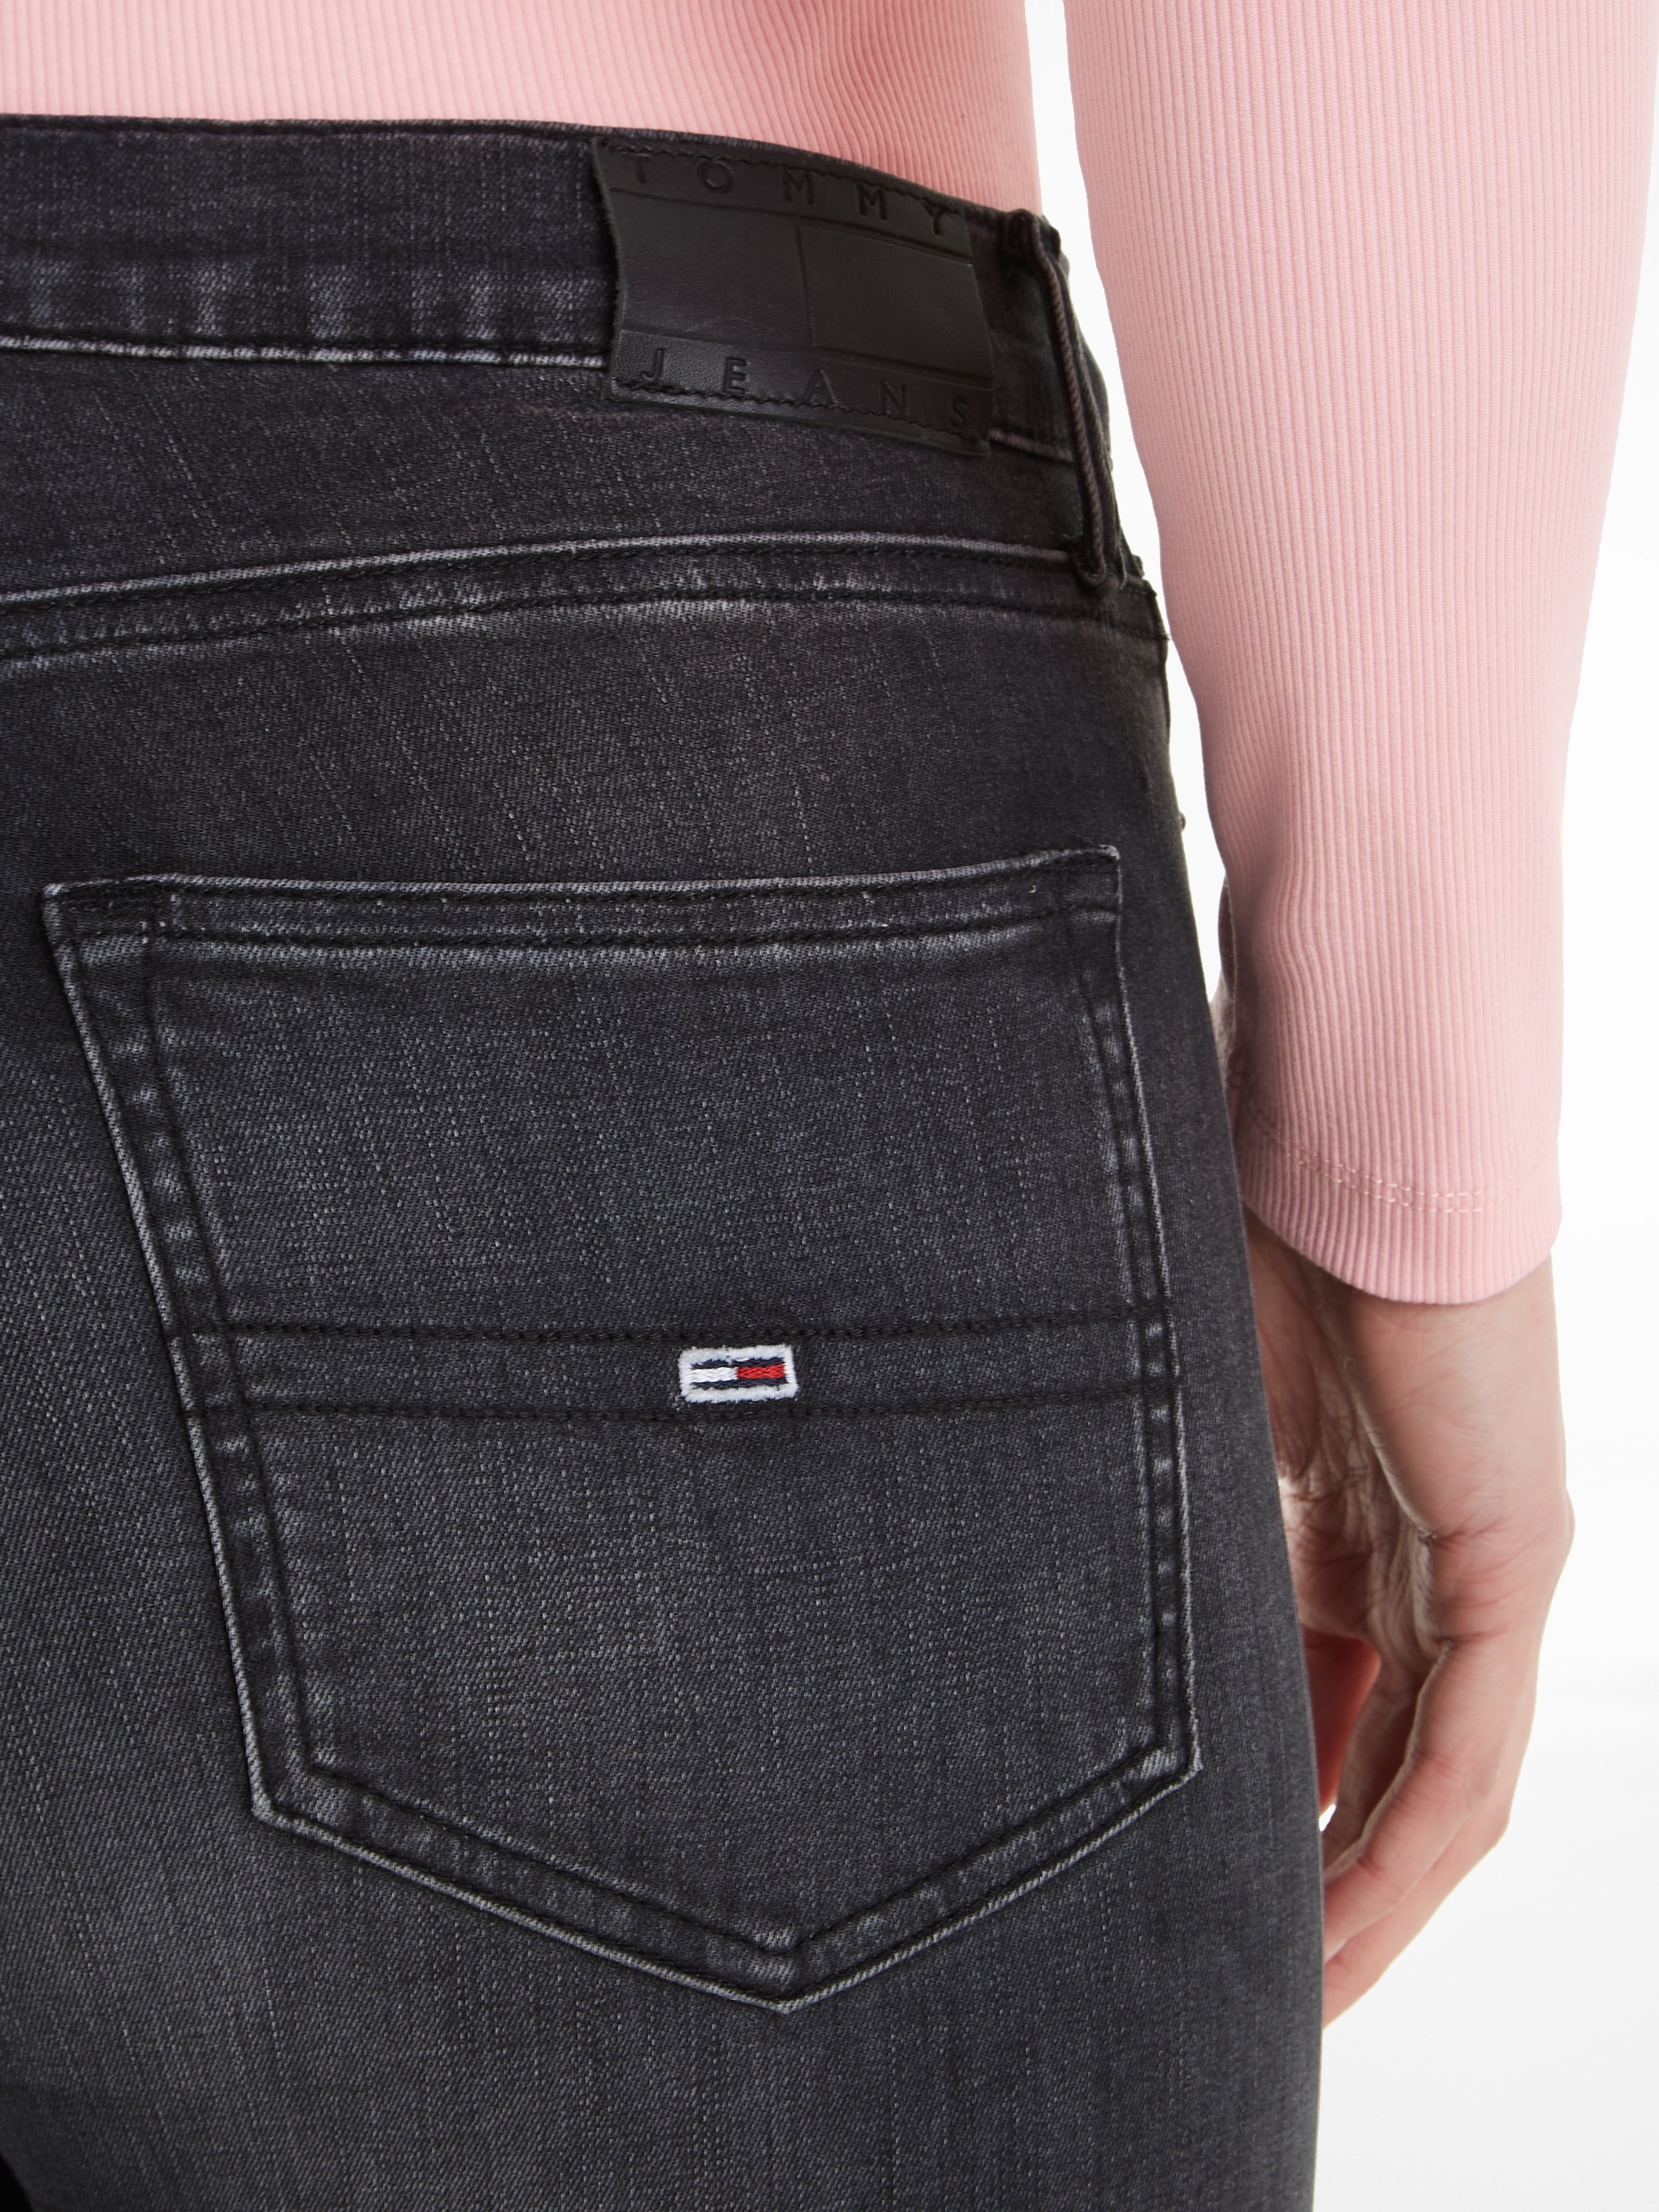 Tommy Jeans Bequeme Jeans »Sylvia«, mit Markenlabel bei ♕